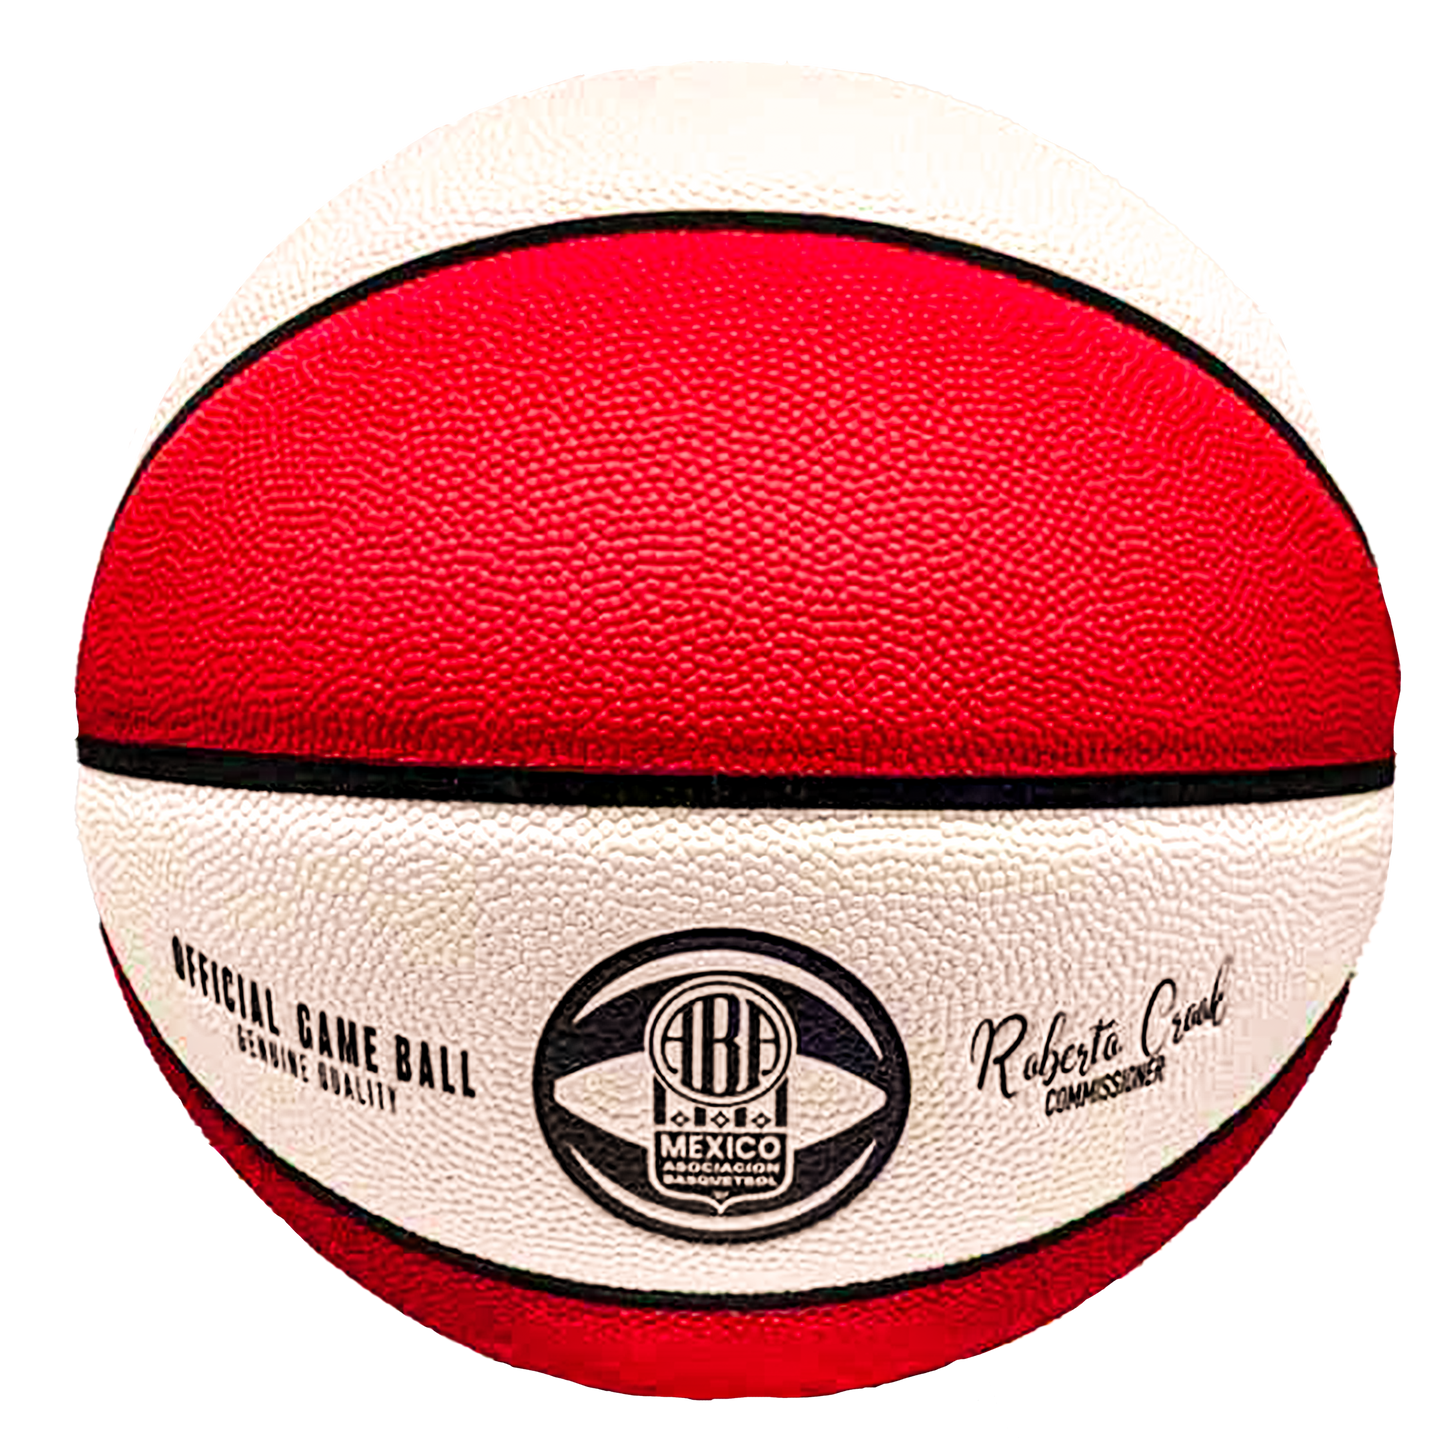 COLLECTORS WANTED🏀🇲🇽 THE EPIC ABAMX TRI-COLOR BASKETBALL! 🇲🇽🏀